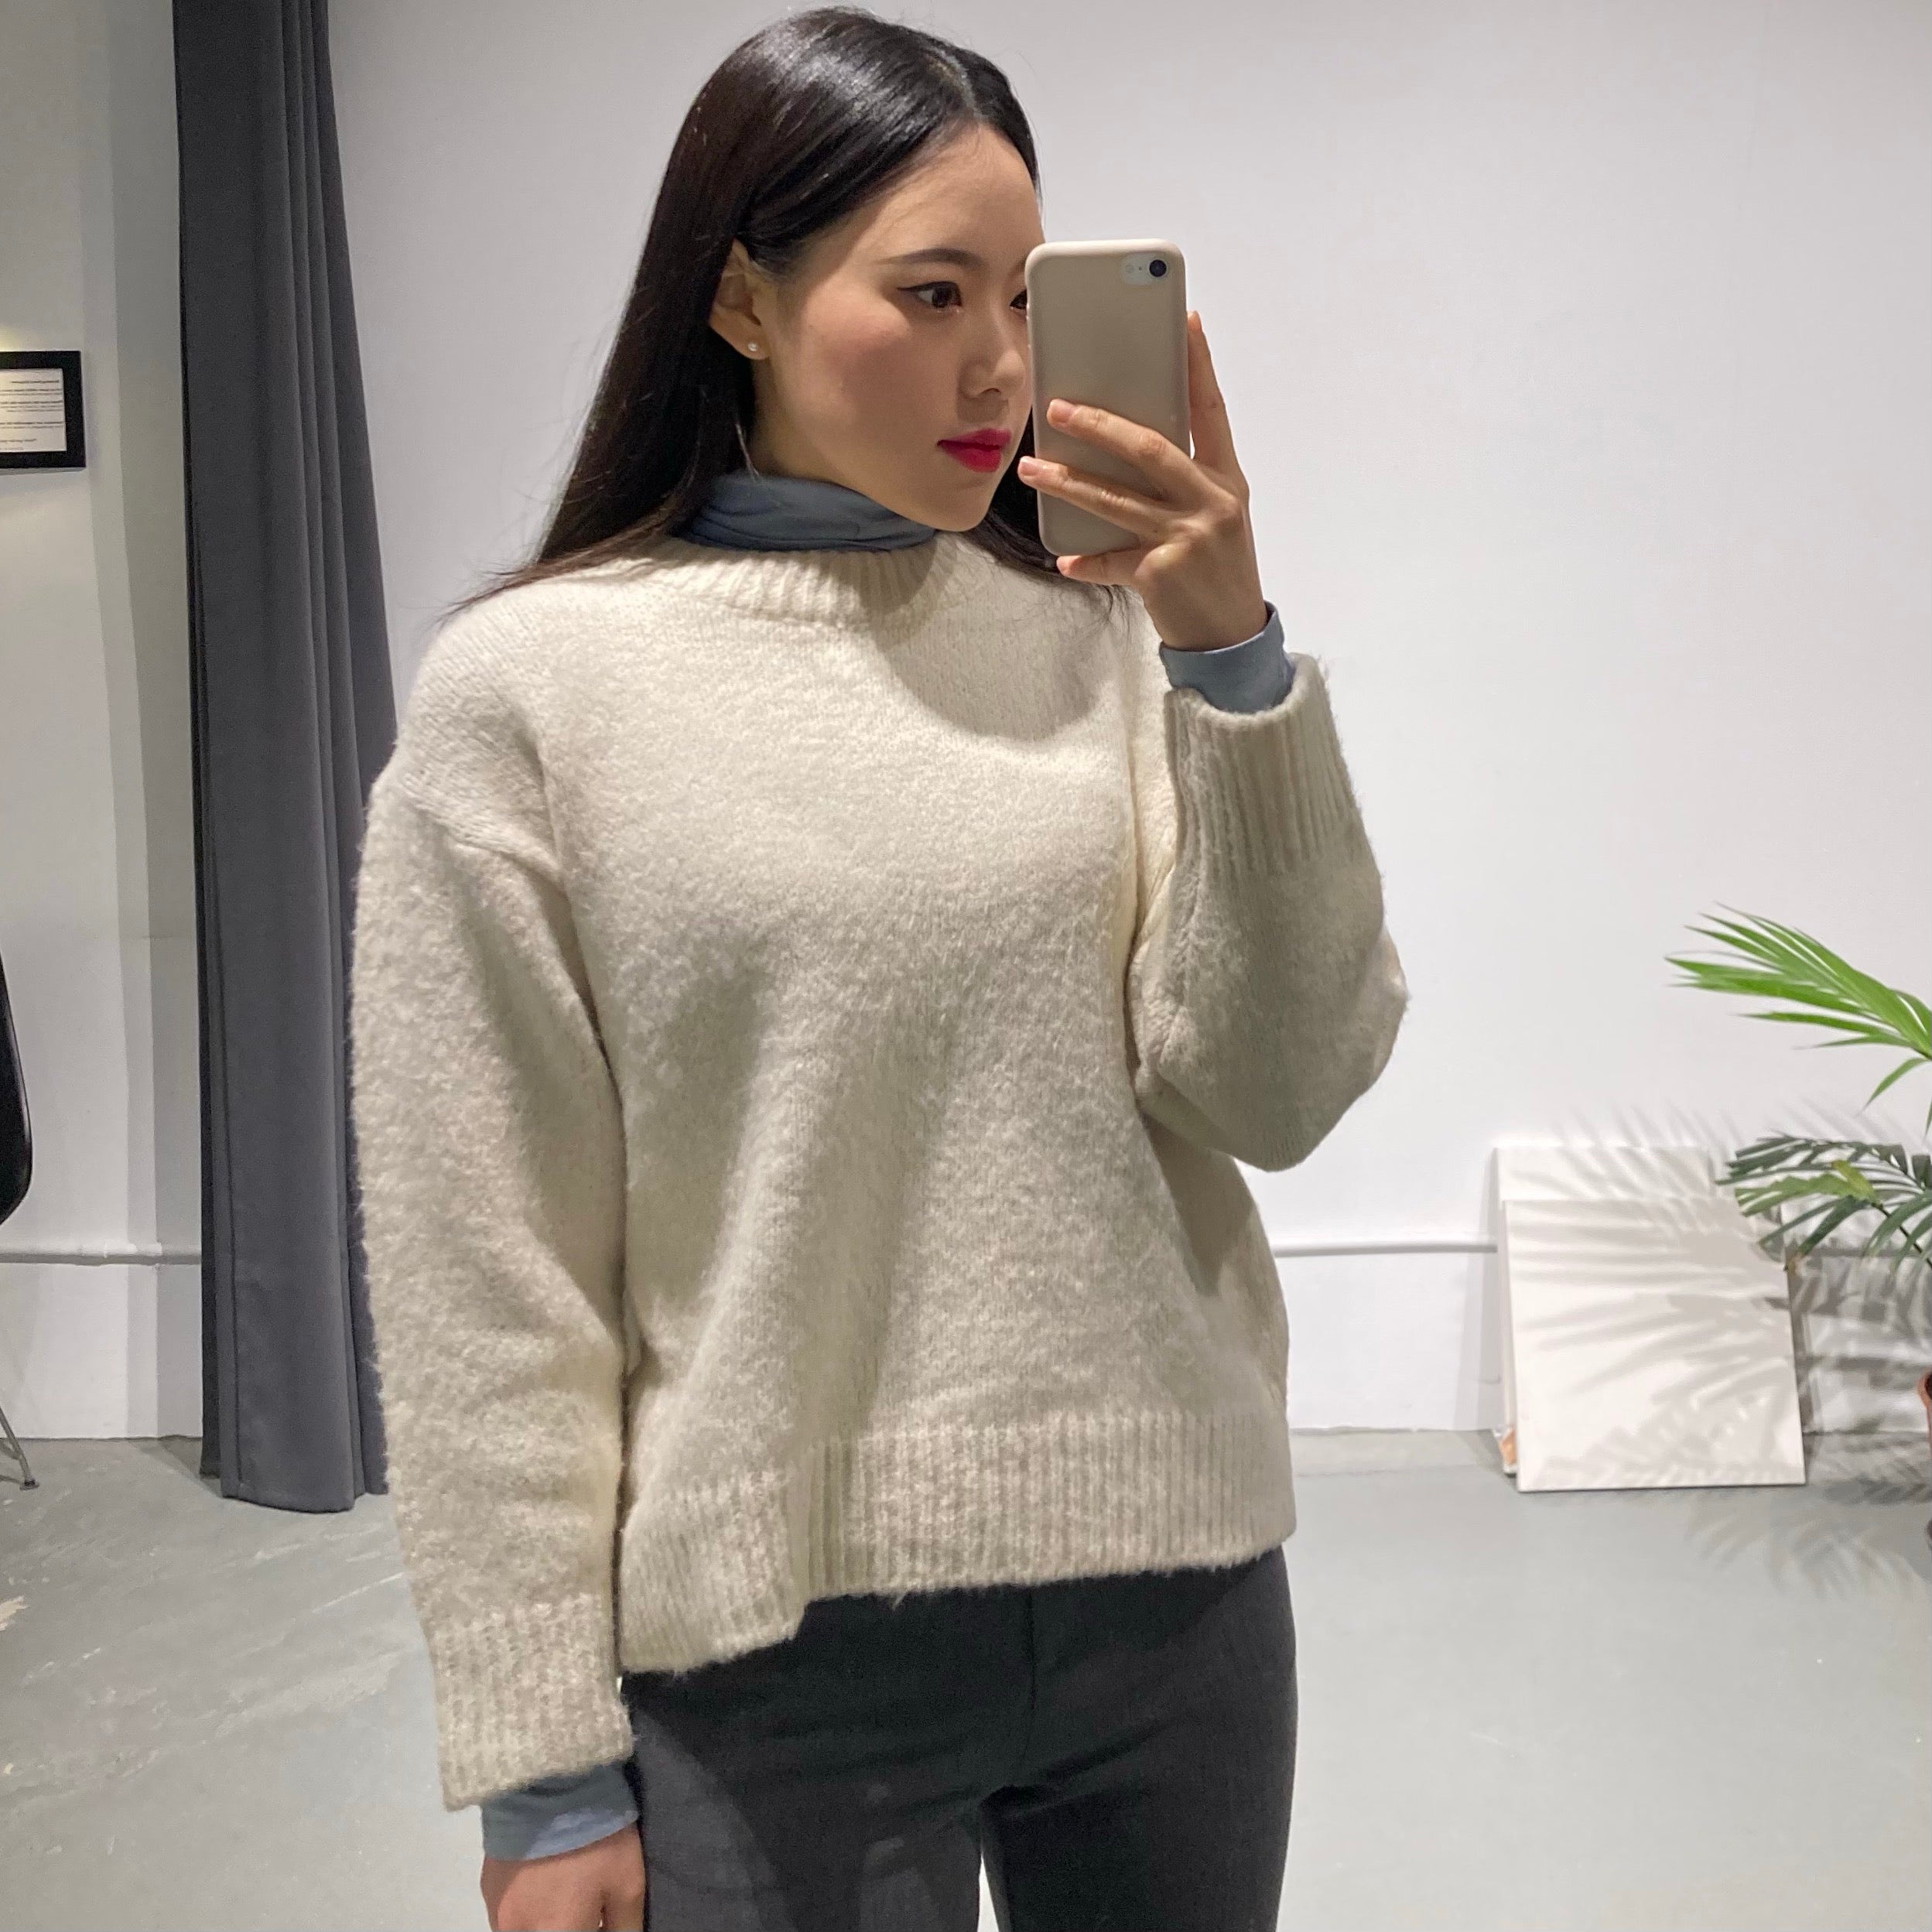 YOON Cashmere Knit Top